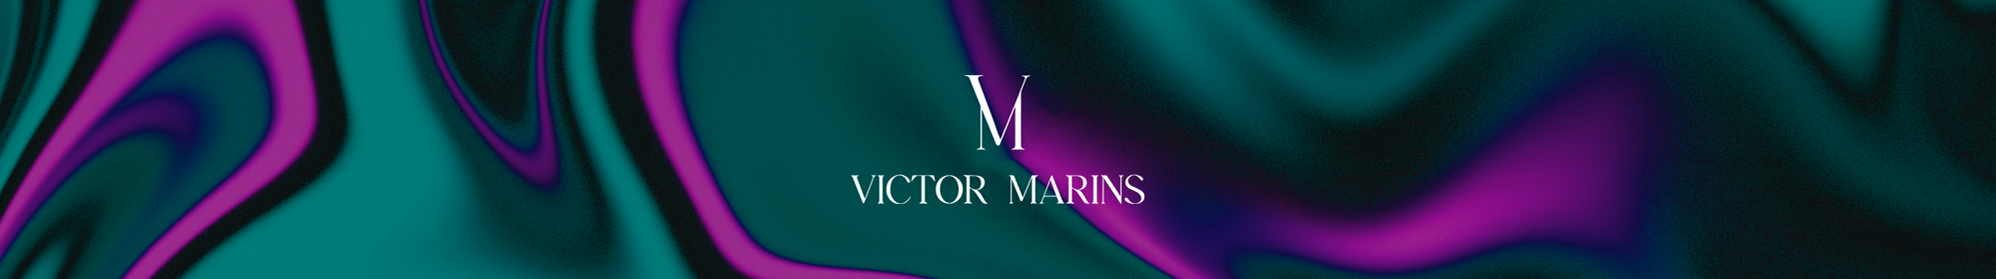 Victor Marins's profile banner